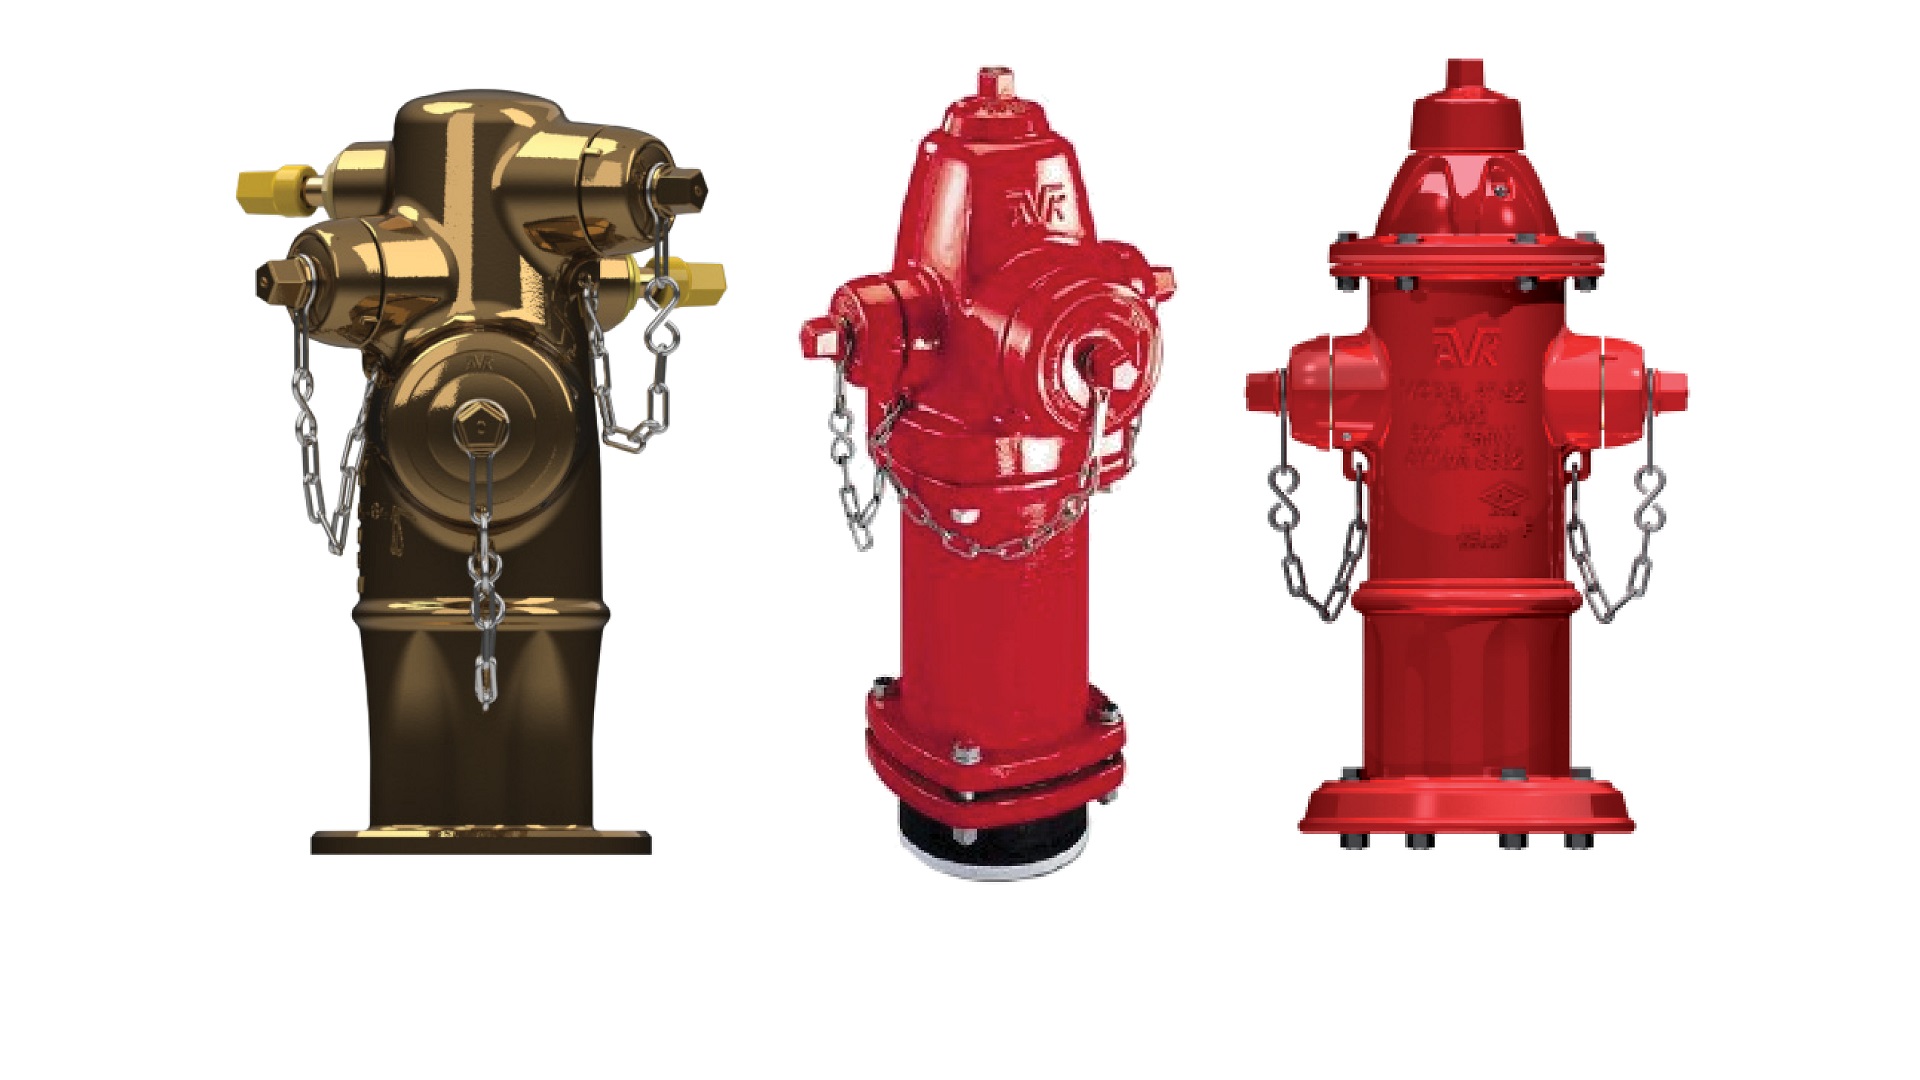 AVK Fire Protection Hydrants